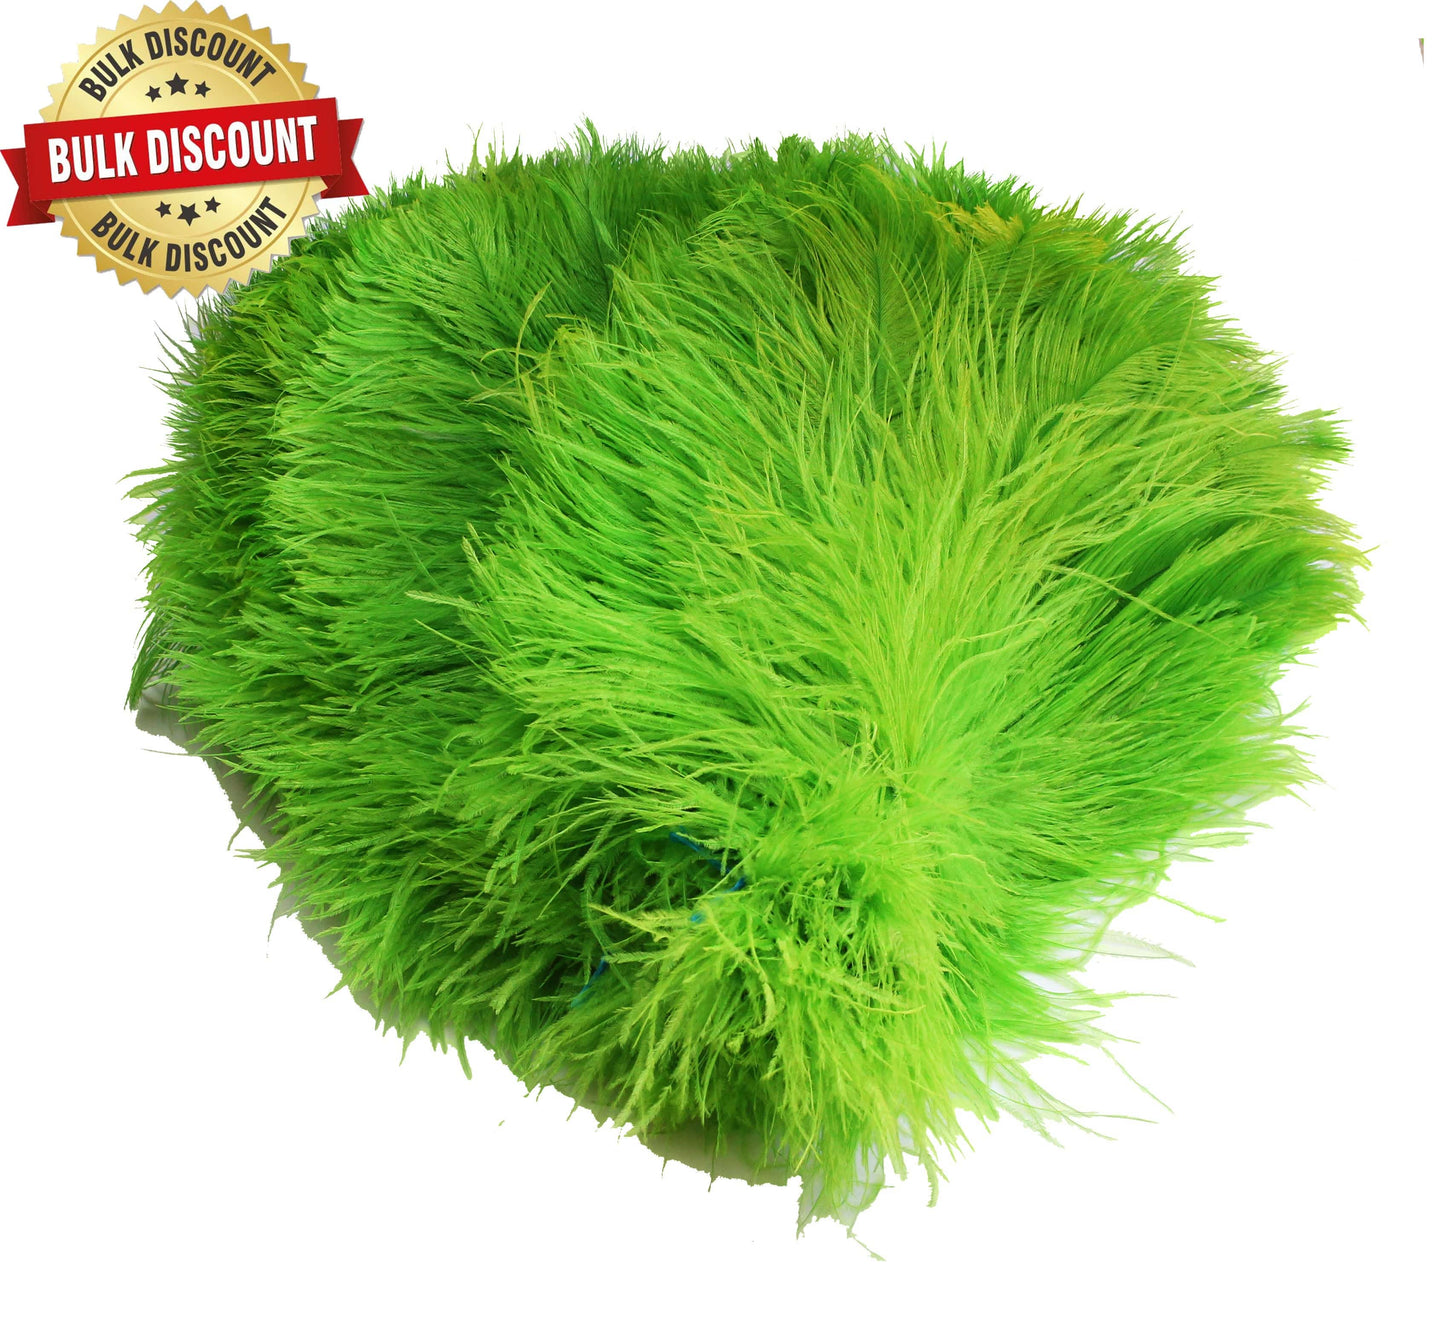 BULK 1/2lb Ostrich Feather Tail Plumes 15-20" (Lime Green) - Buy Ostrich Feathers